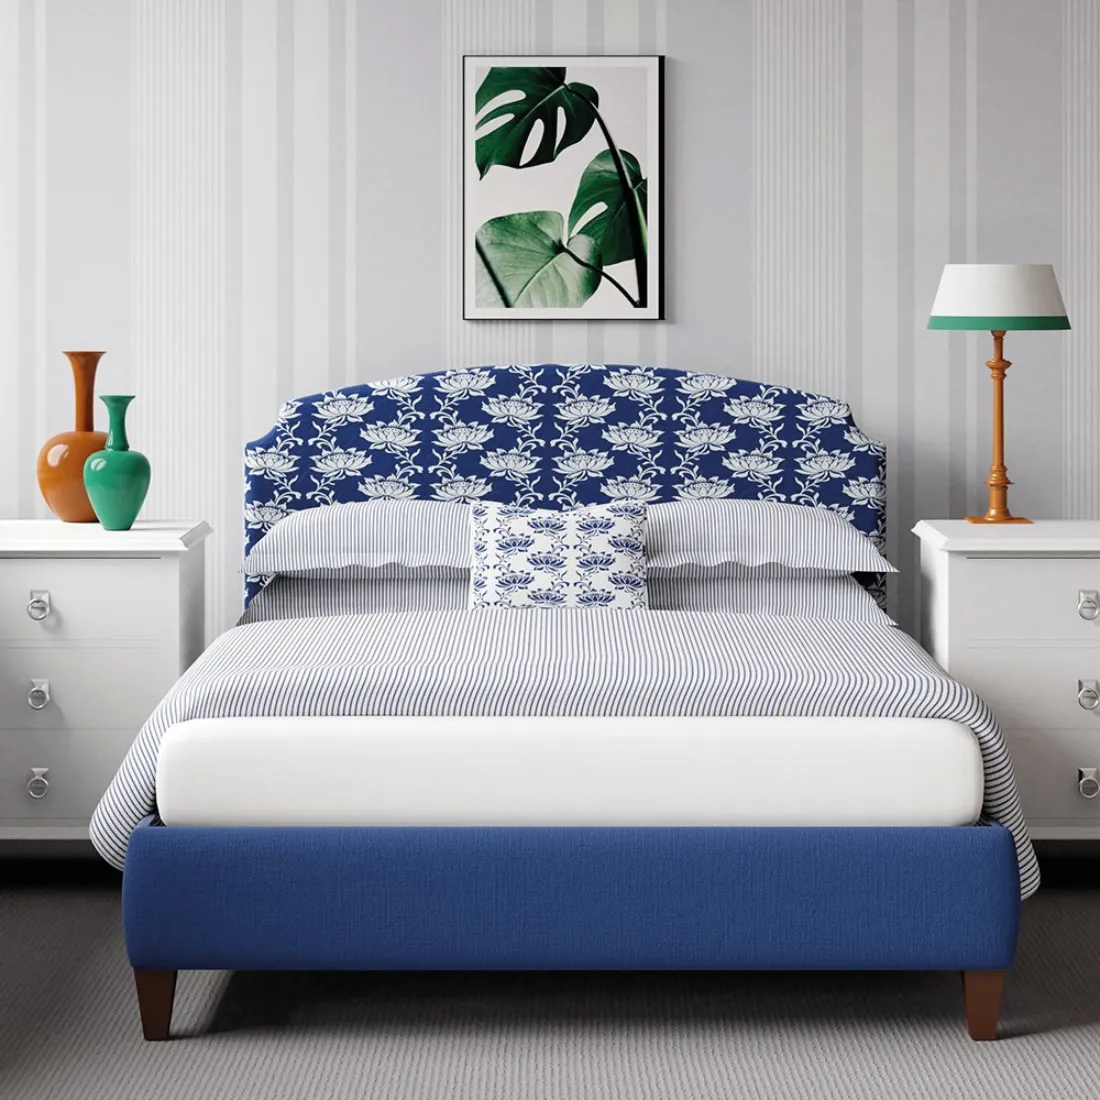 Lide upholstered bed frame in Royal Blue, from £619, The Original Bed Co.